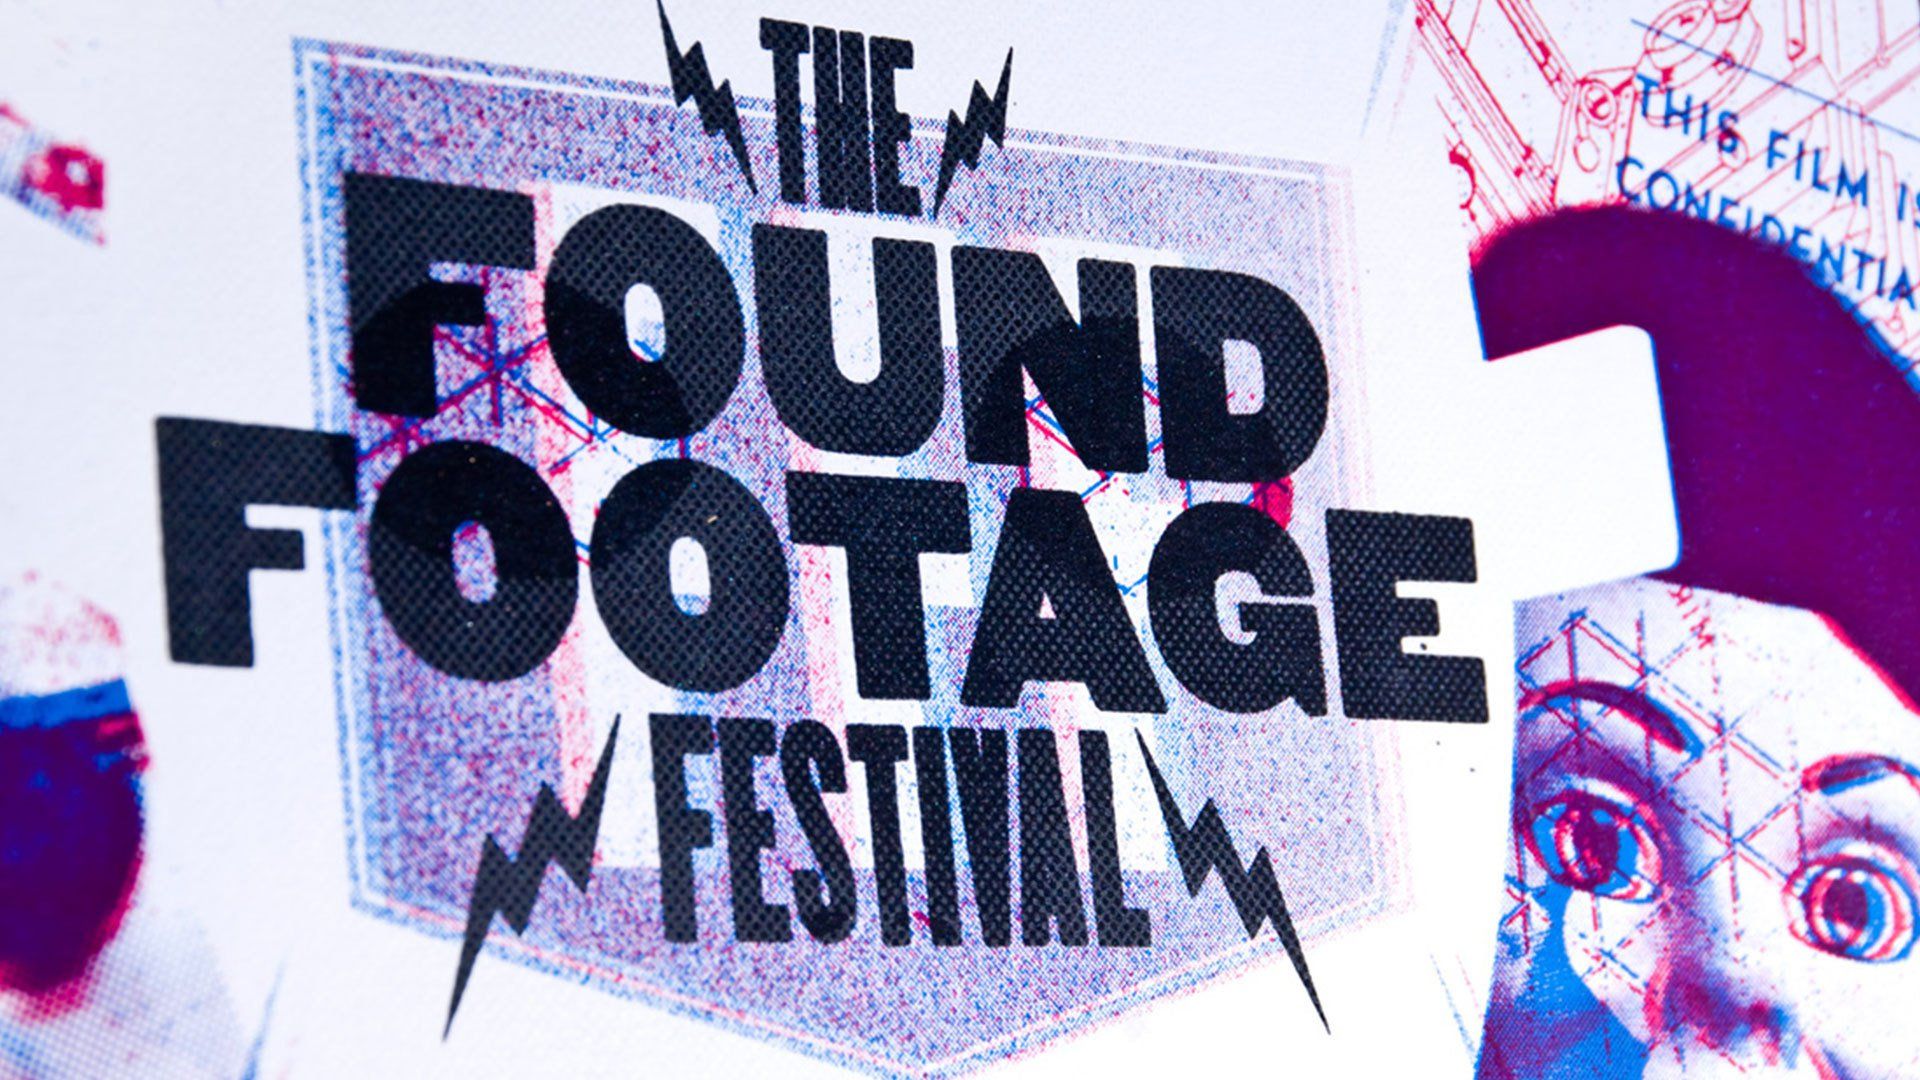 Found Footage Festival Volume 6: Live in Chicago Backdrop